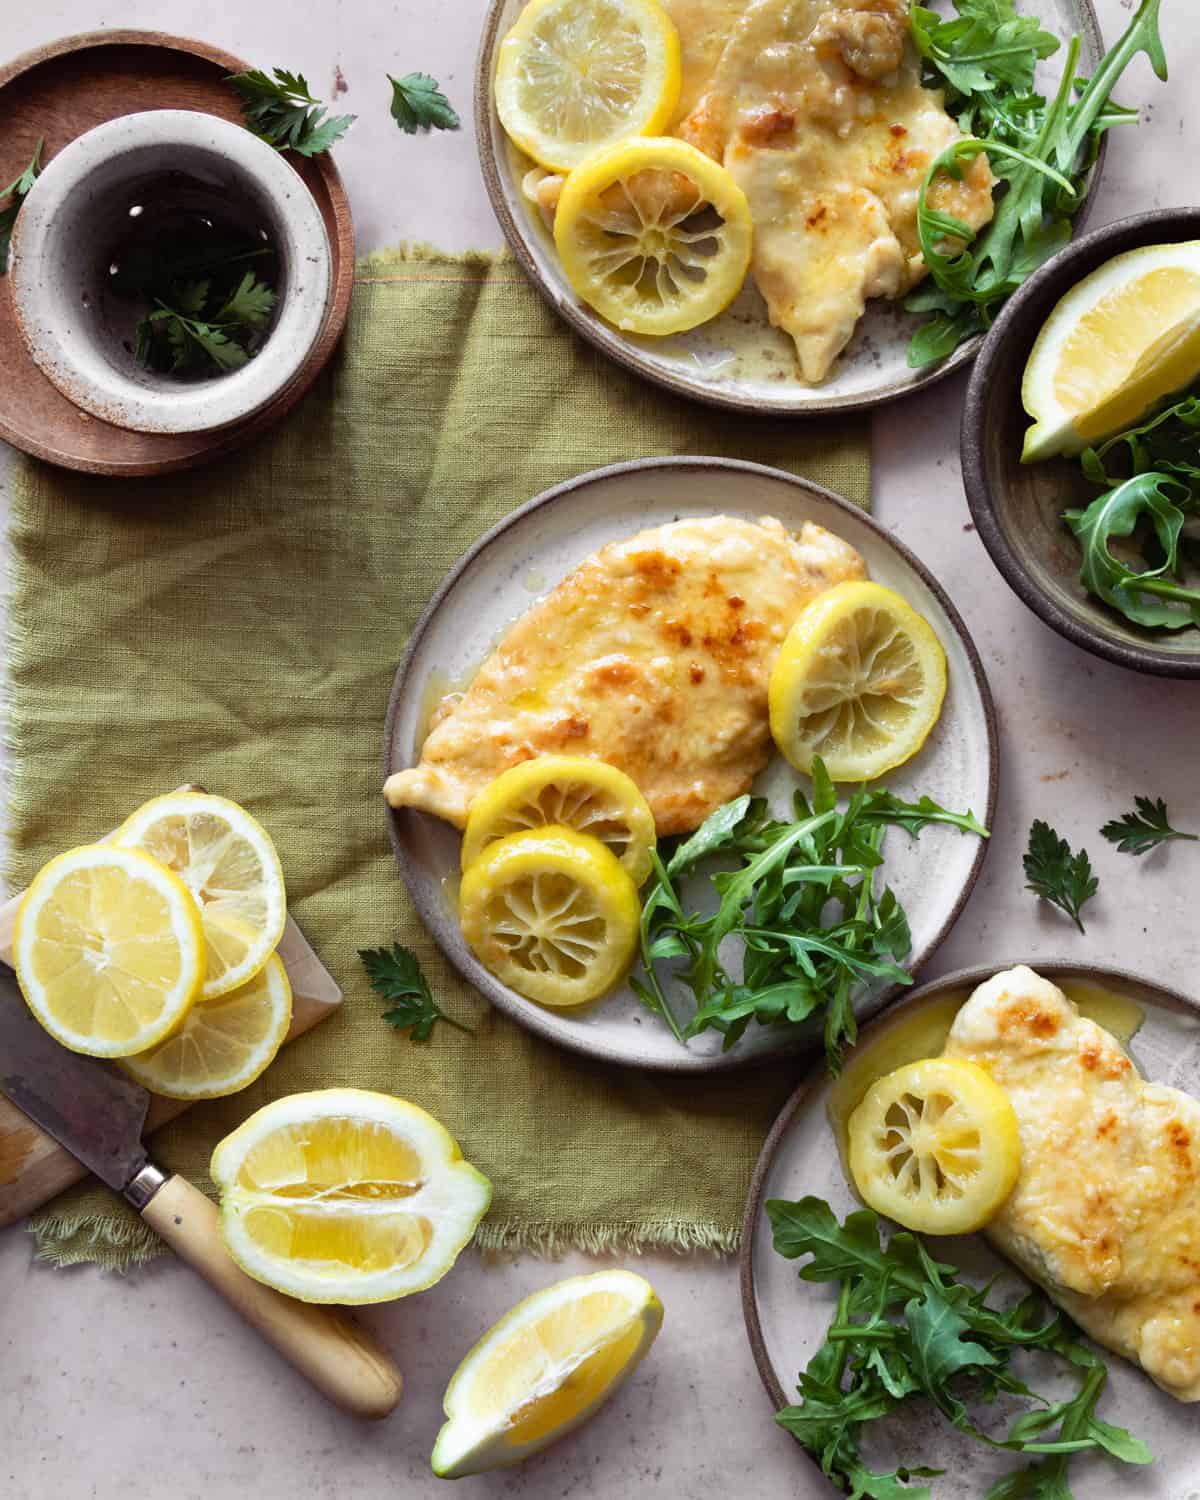 Chickens piccata al  limone recipe on plates with arugula and lemons slices around.